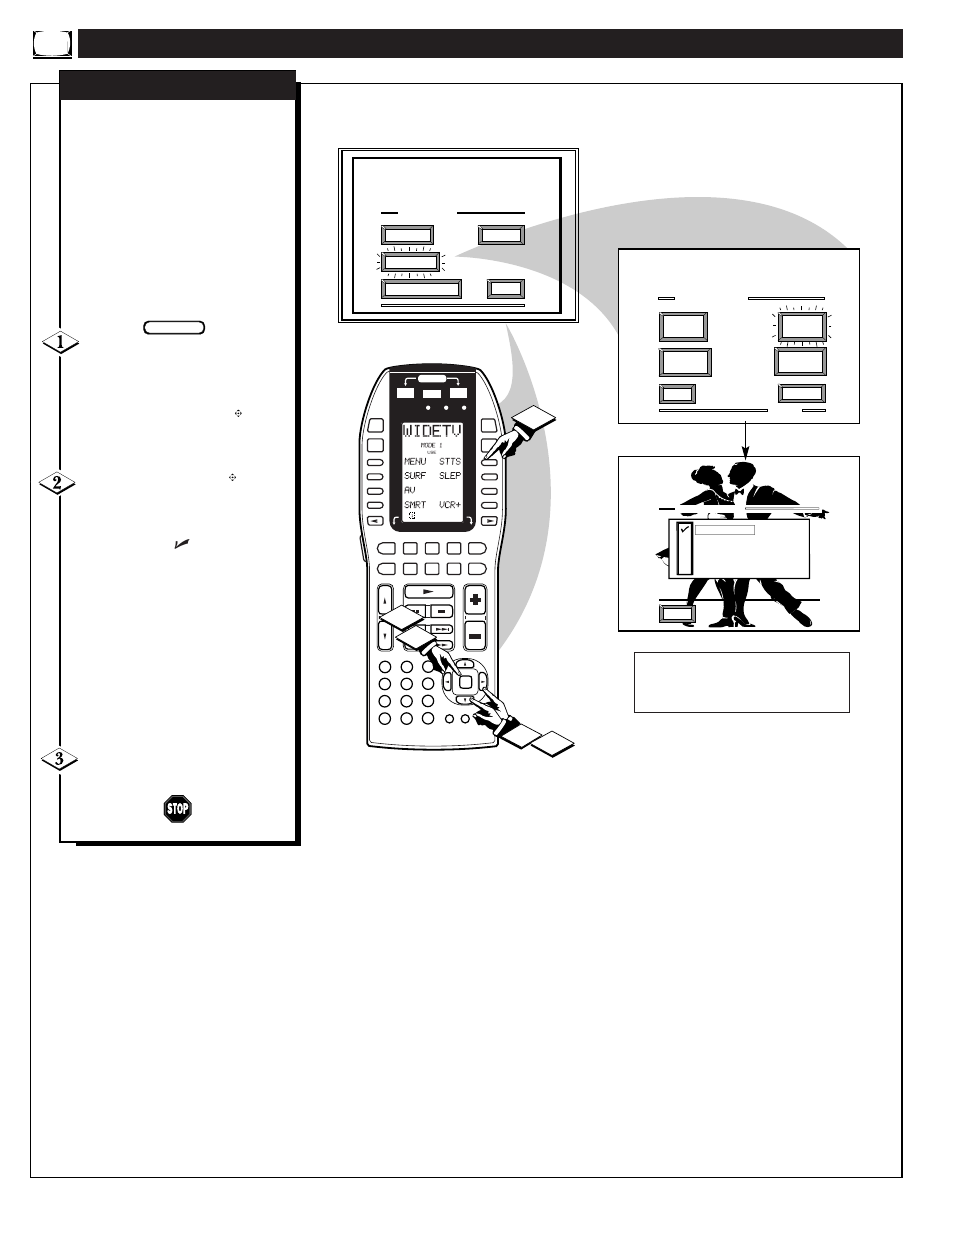 Eature, Ontrols, Continued | Marantz PV5580 User Manual | Page 12 / 56